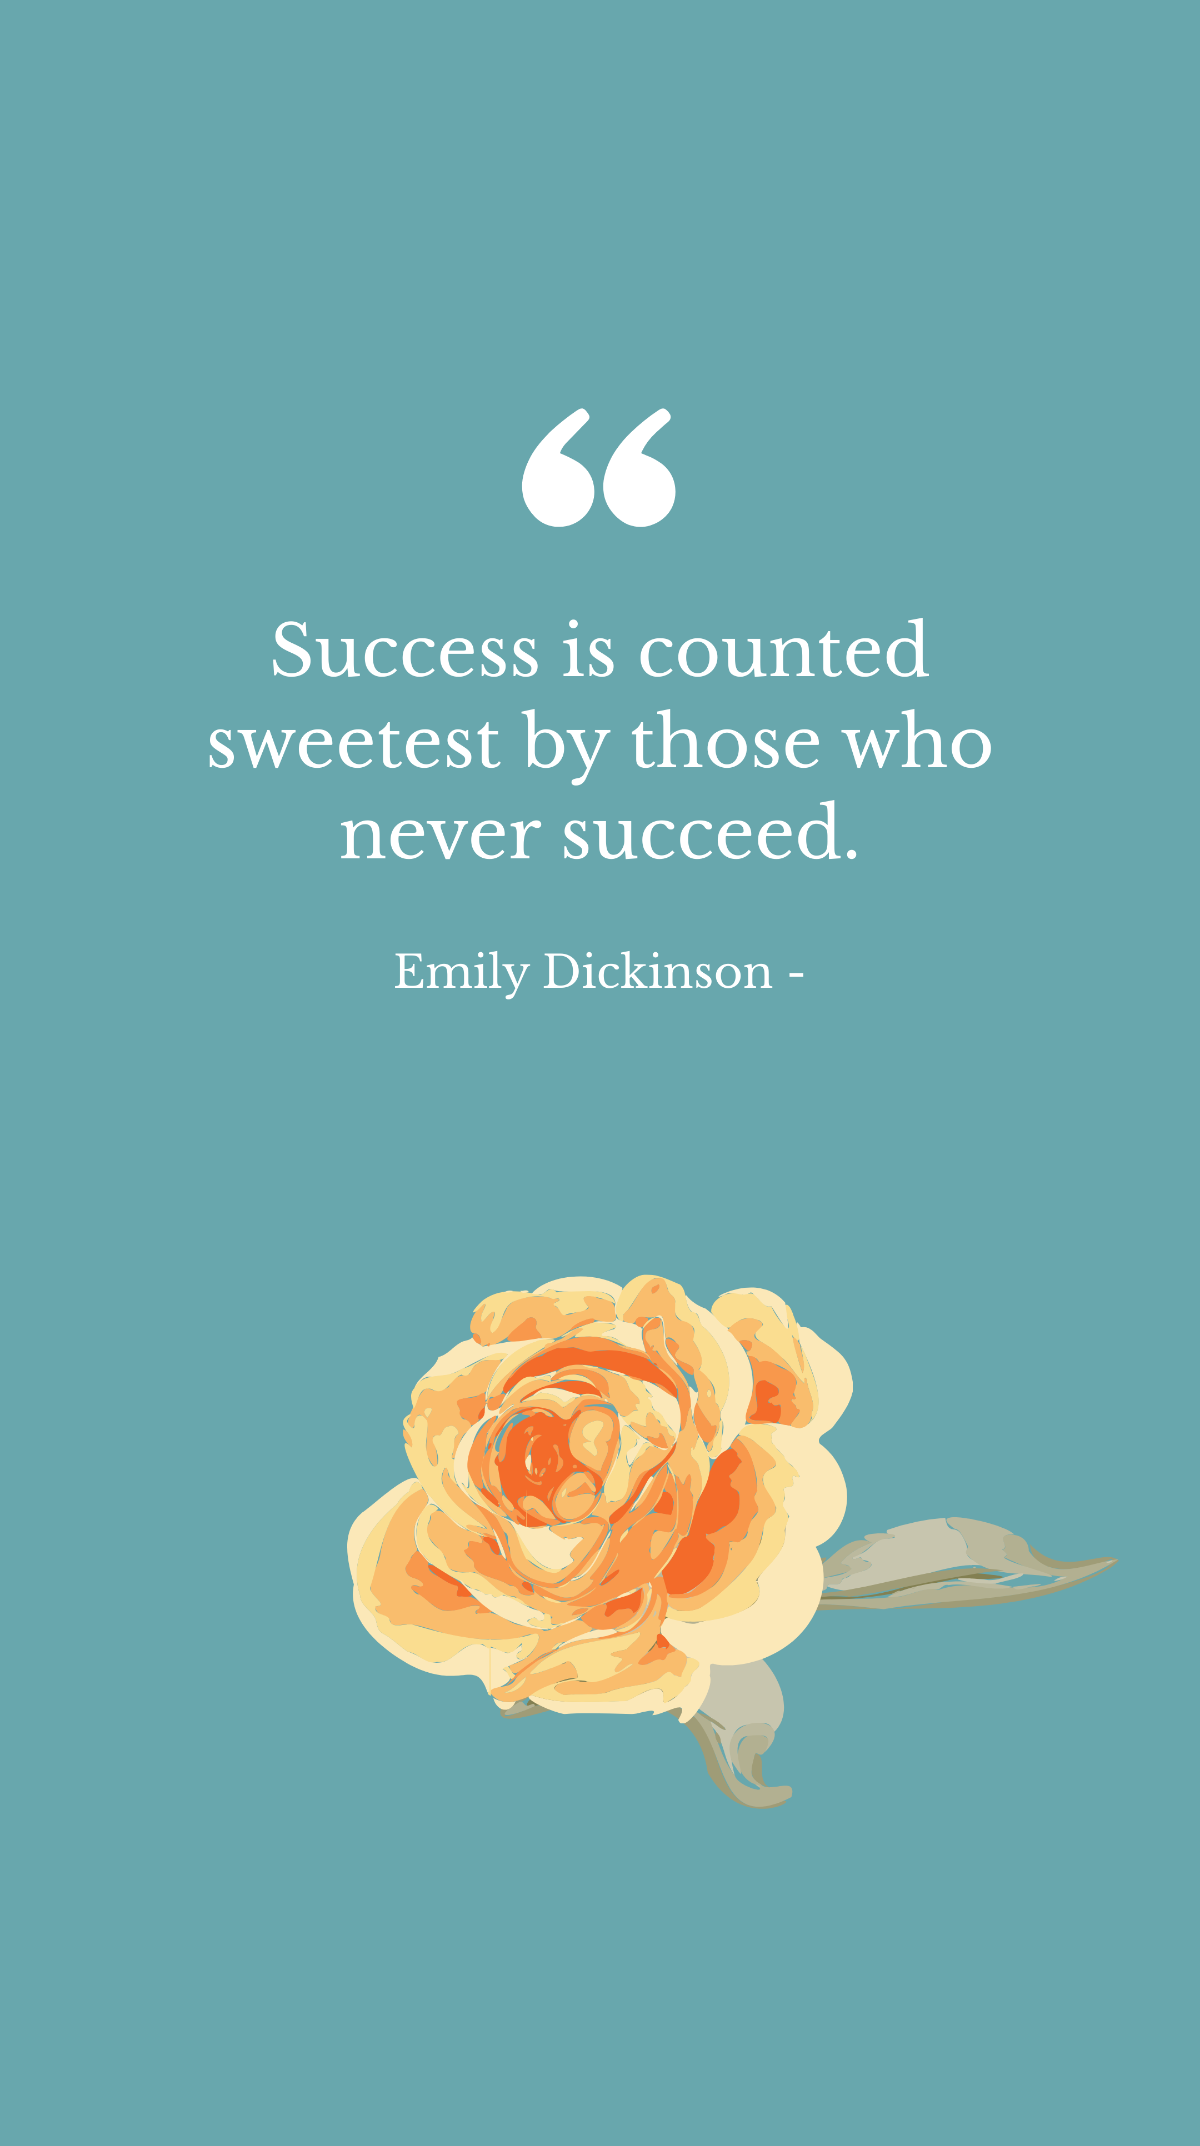 Emily Dickinson - Success is counted sweetest by those who never succeed. Template